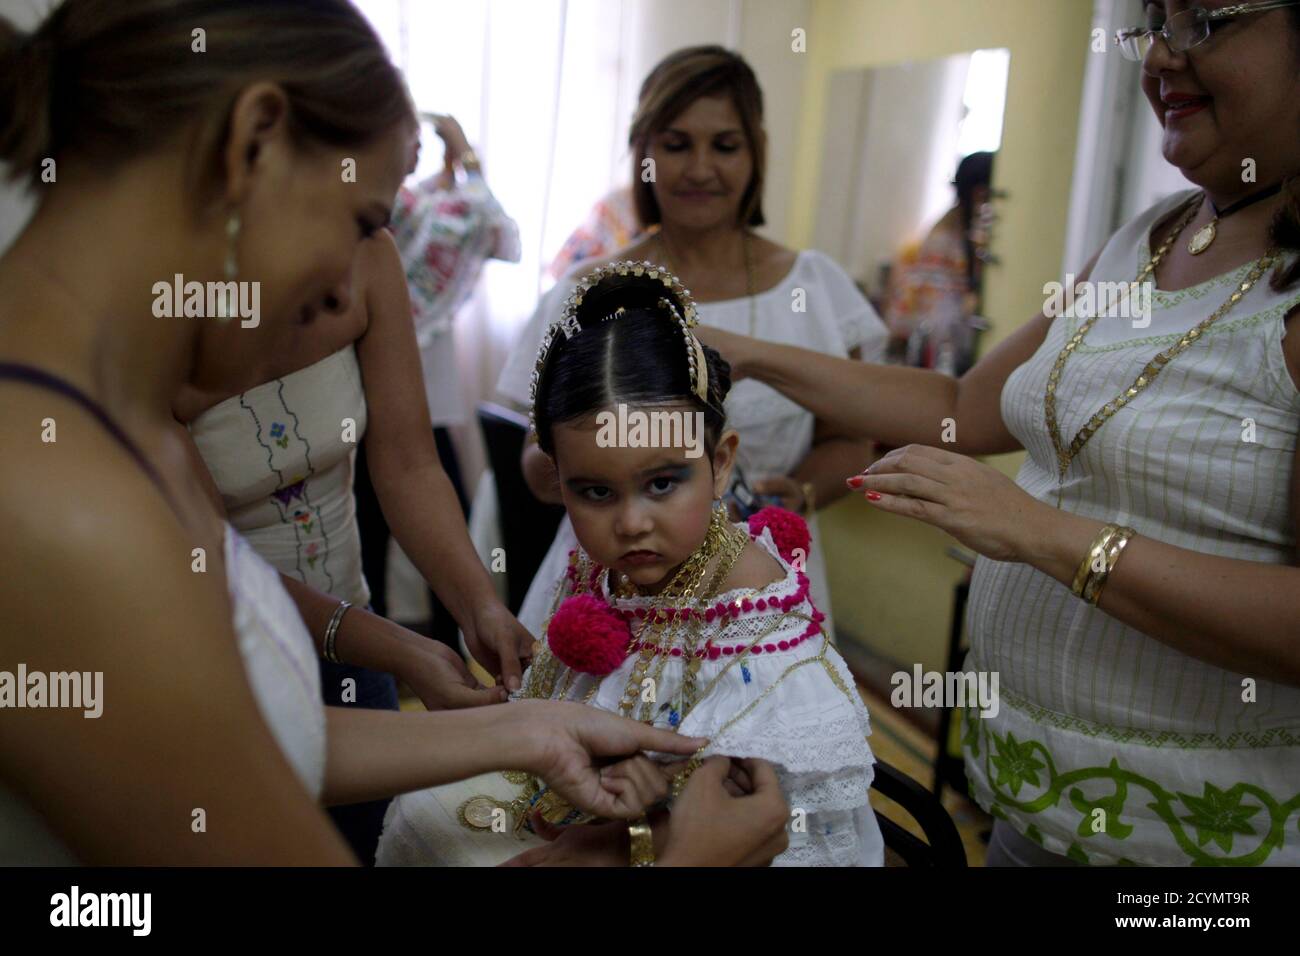 A girl is seen wearing traditional clothing known as "Pollera" inside a  beauty salon as she is helped by women before the annual Thousand Polleras  parade in Las Tablas, in the province